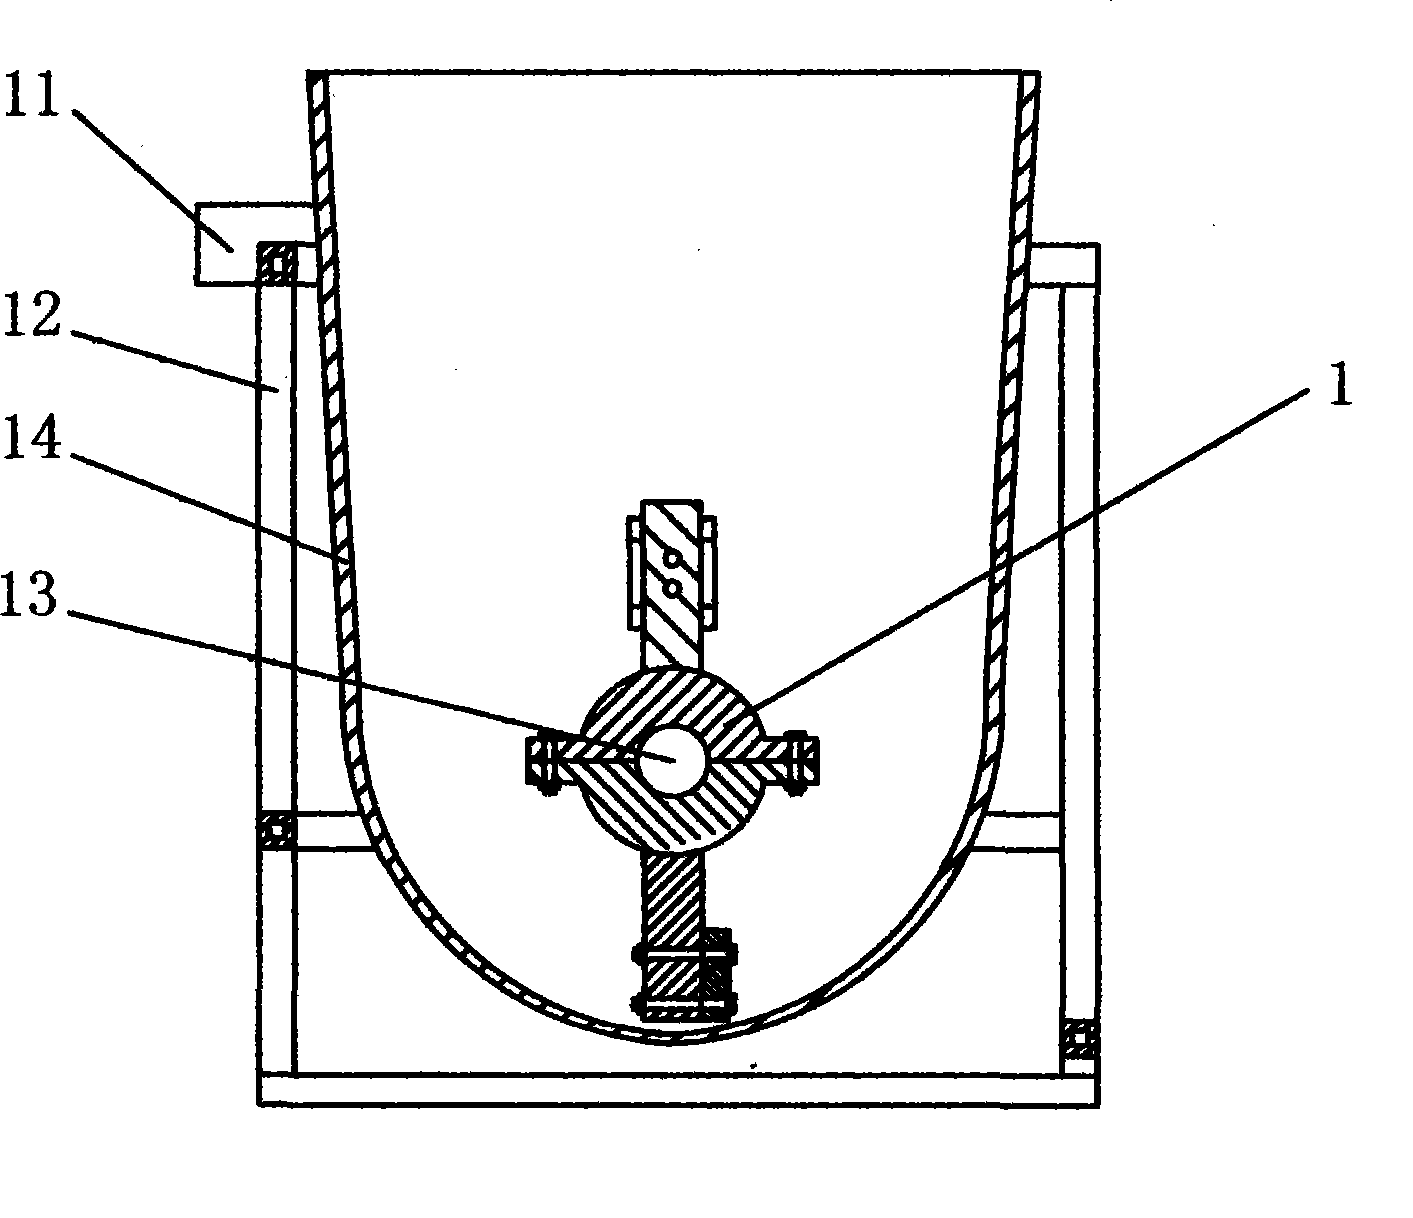 Apparatus for agitating poison bait for killing shrew and mouse